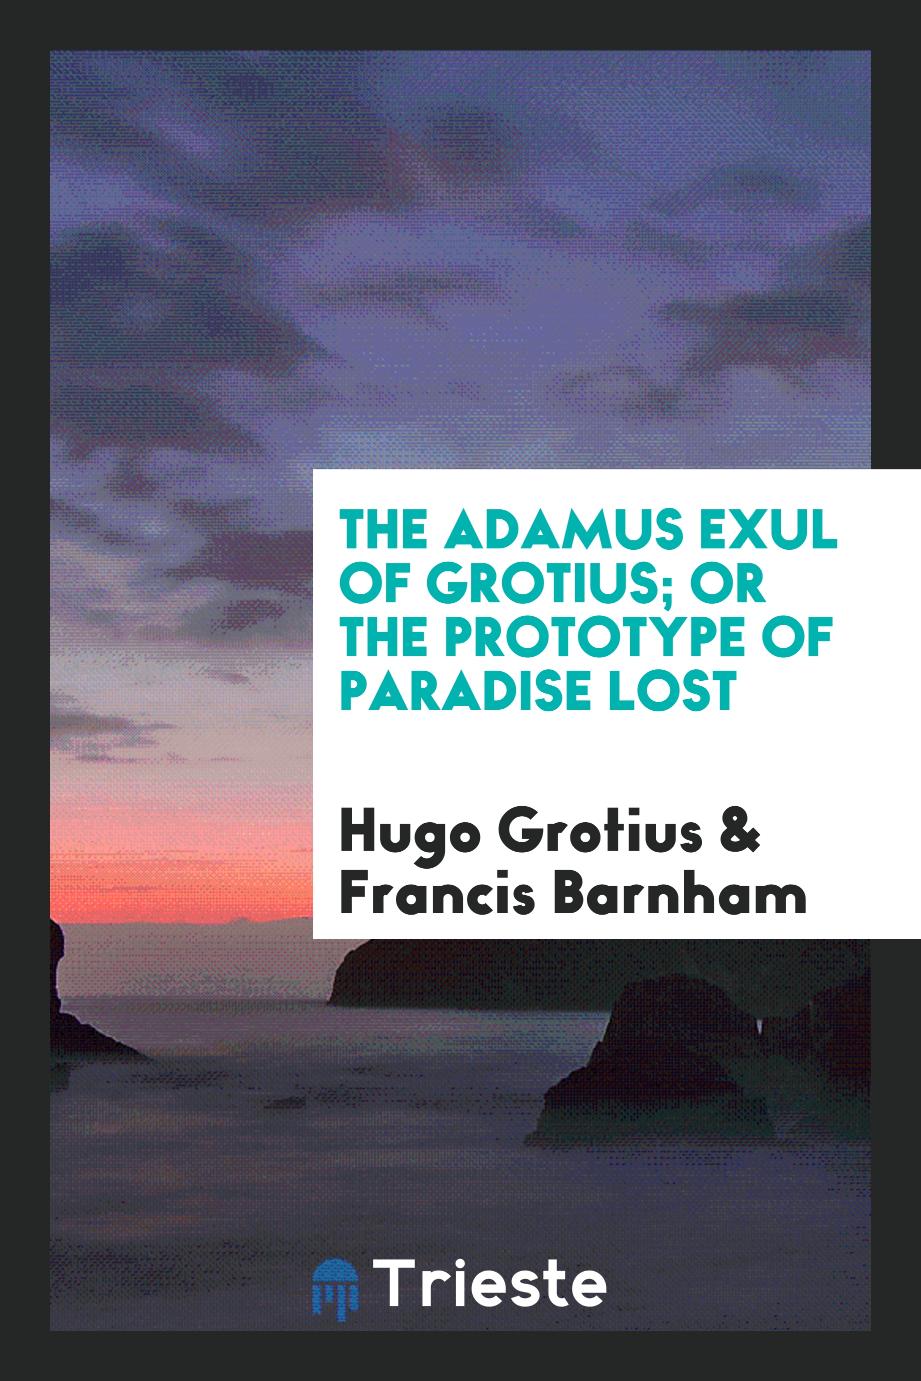 The Adamus exul of Grotius; or The prototype of Paradise lost